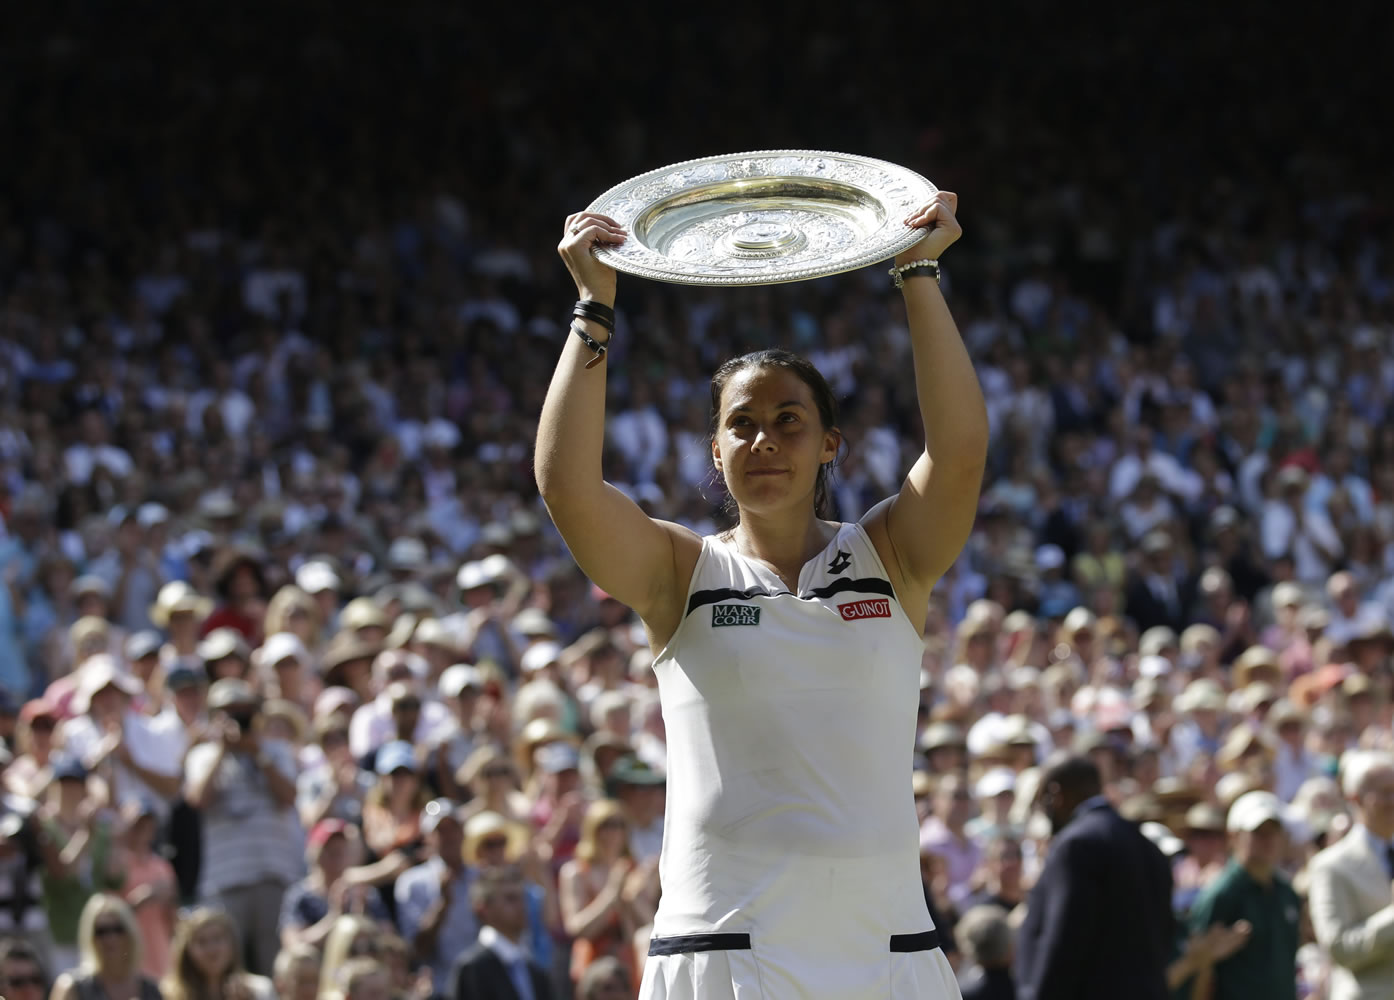 Marion Bartoli of France holds the trophy after winning the Wimbledon women's singles final over Sabine Lisicki of Germany on Saturday.